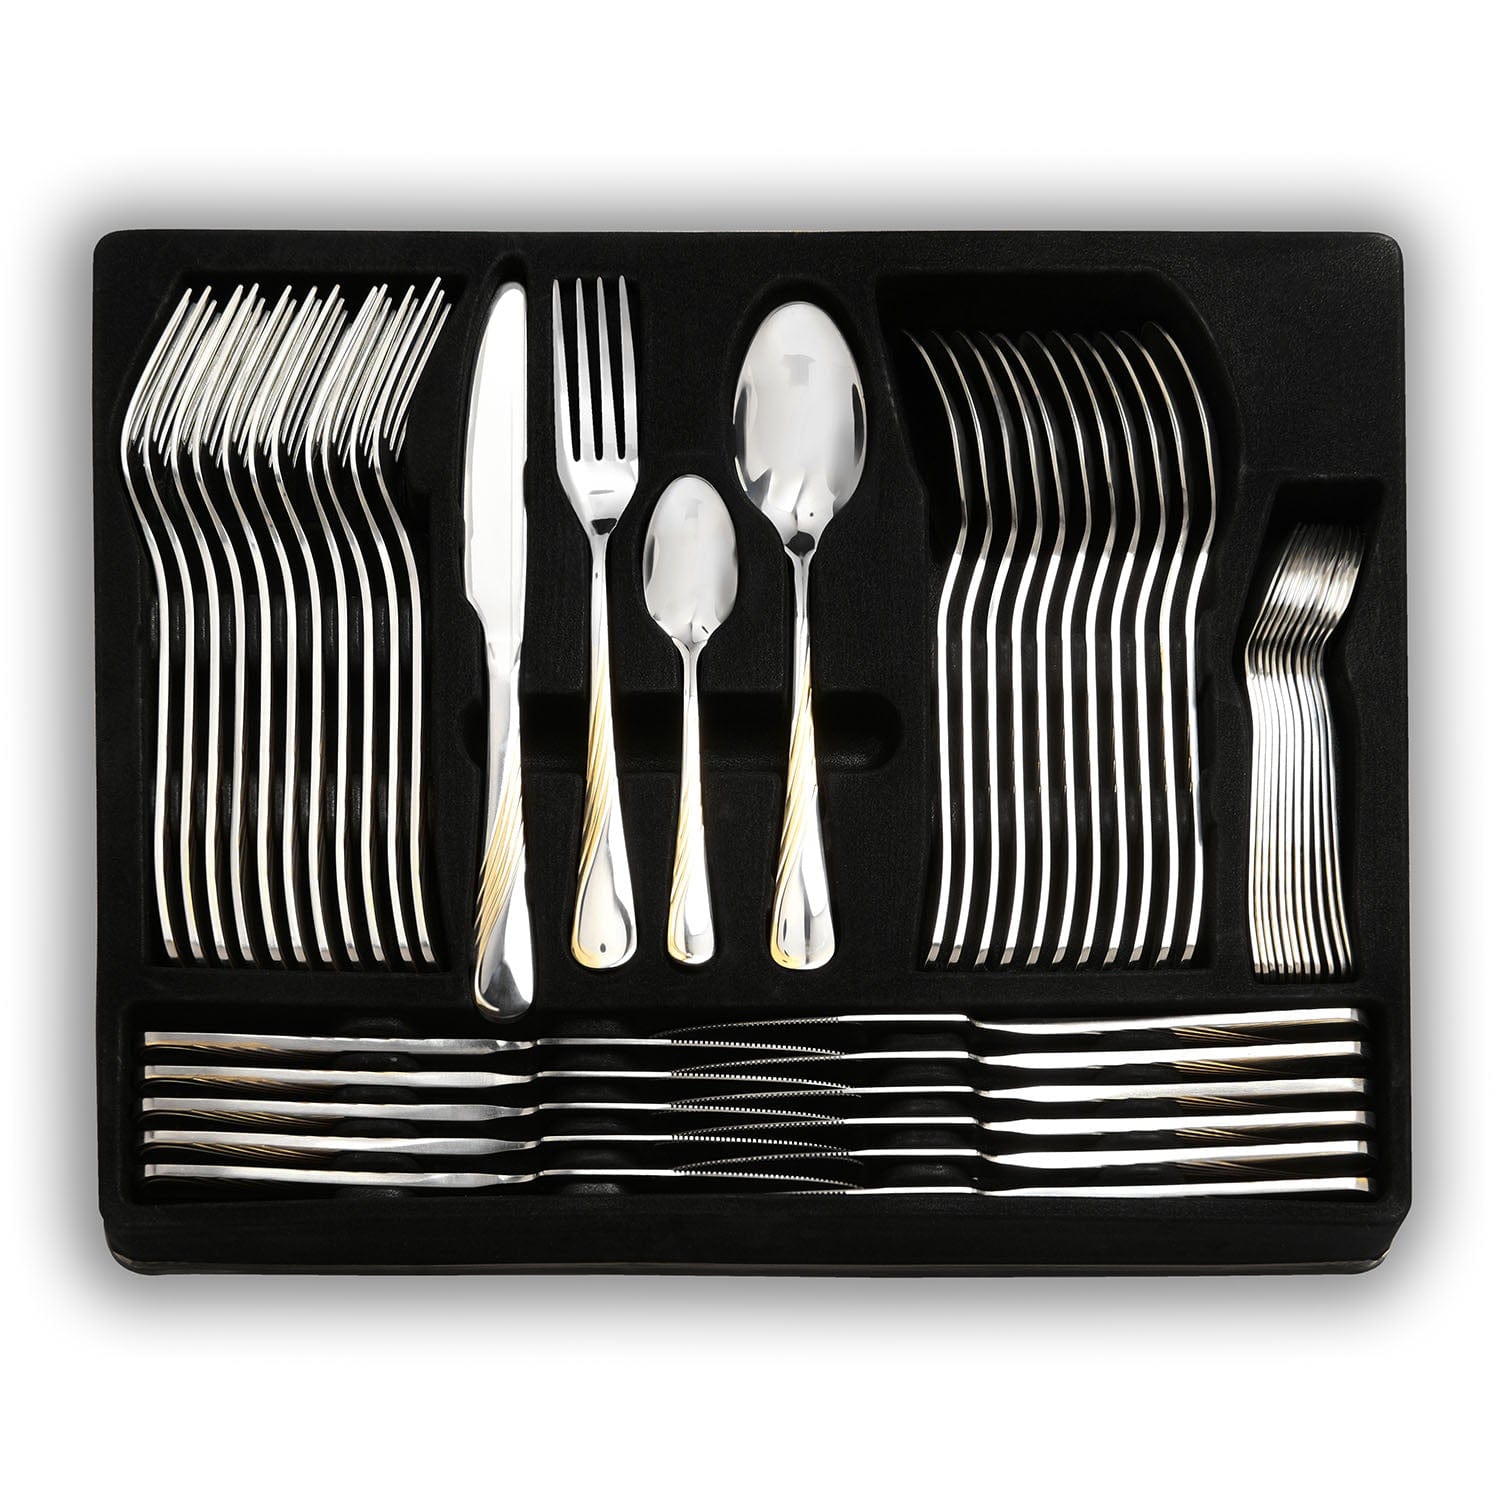 CLOONEY 68PC CUTLERY SET GOLD PLATED